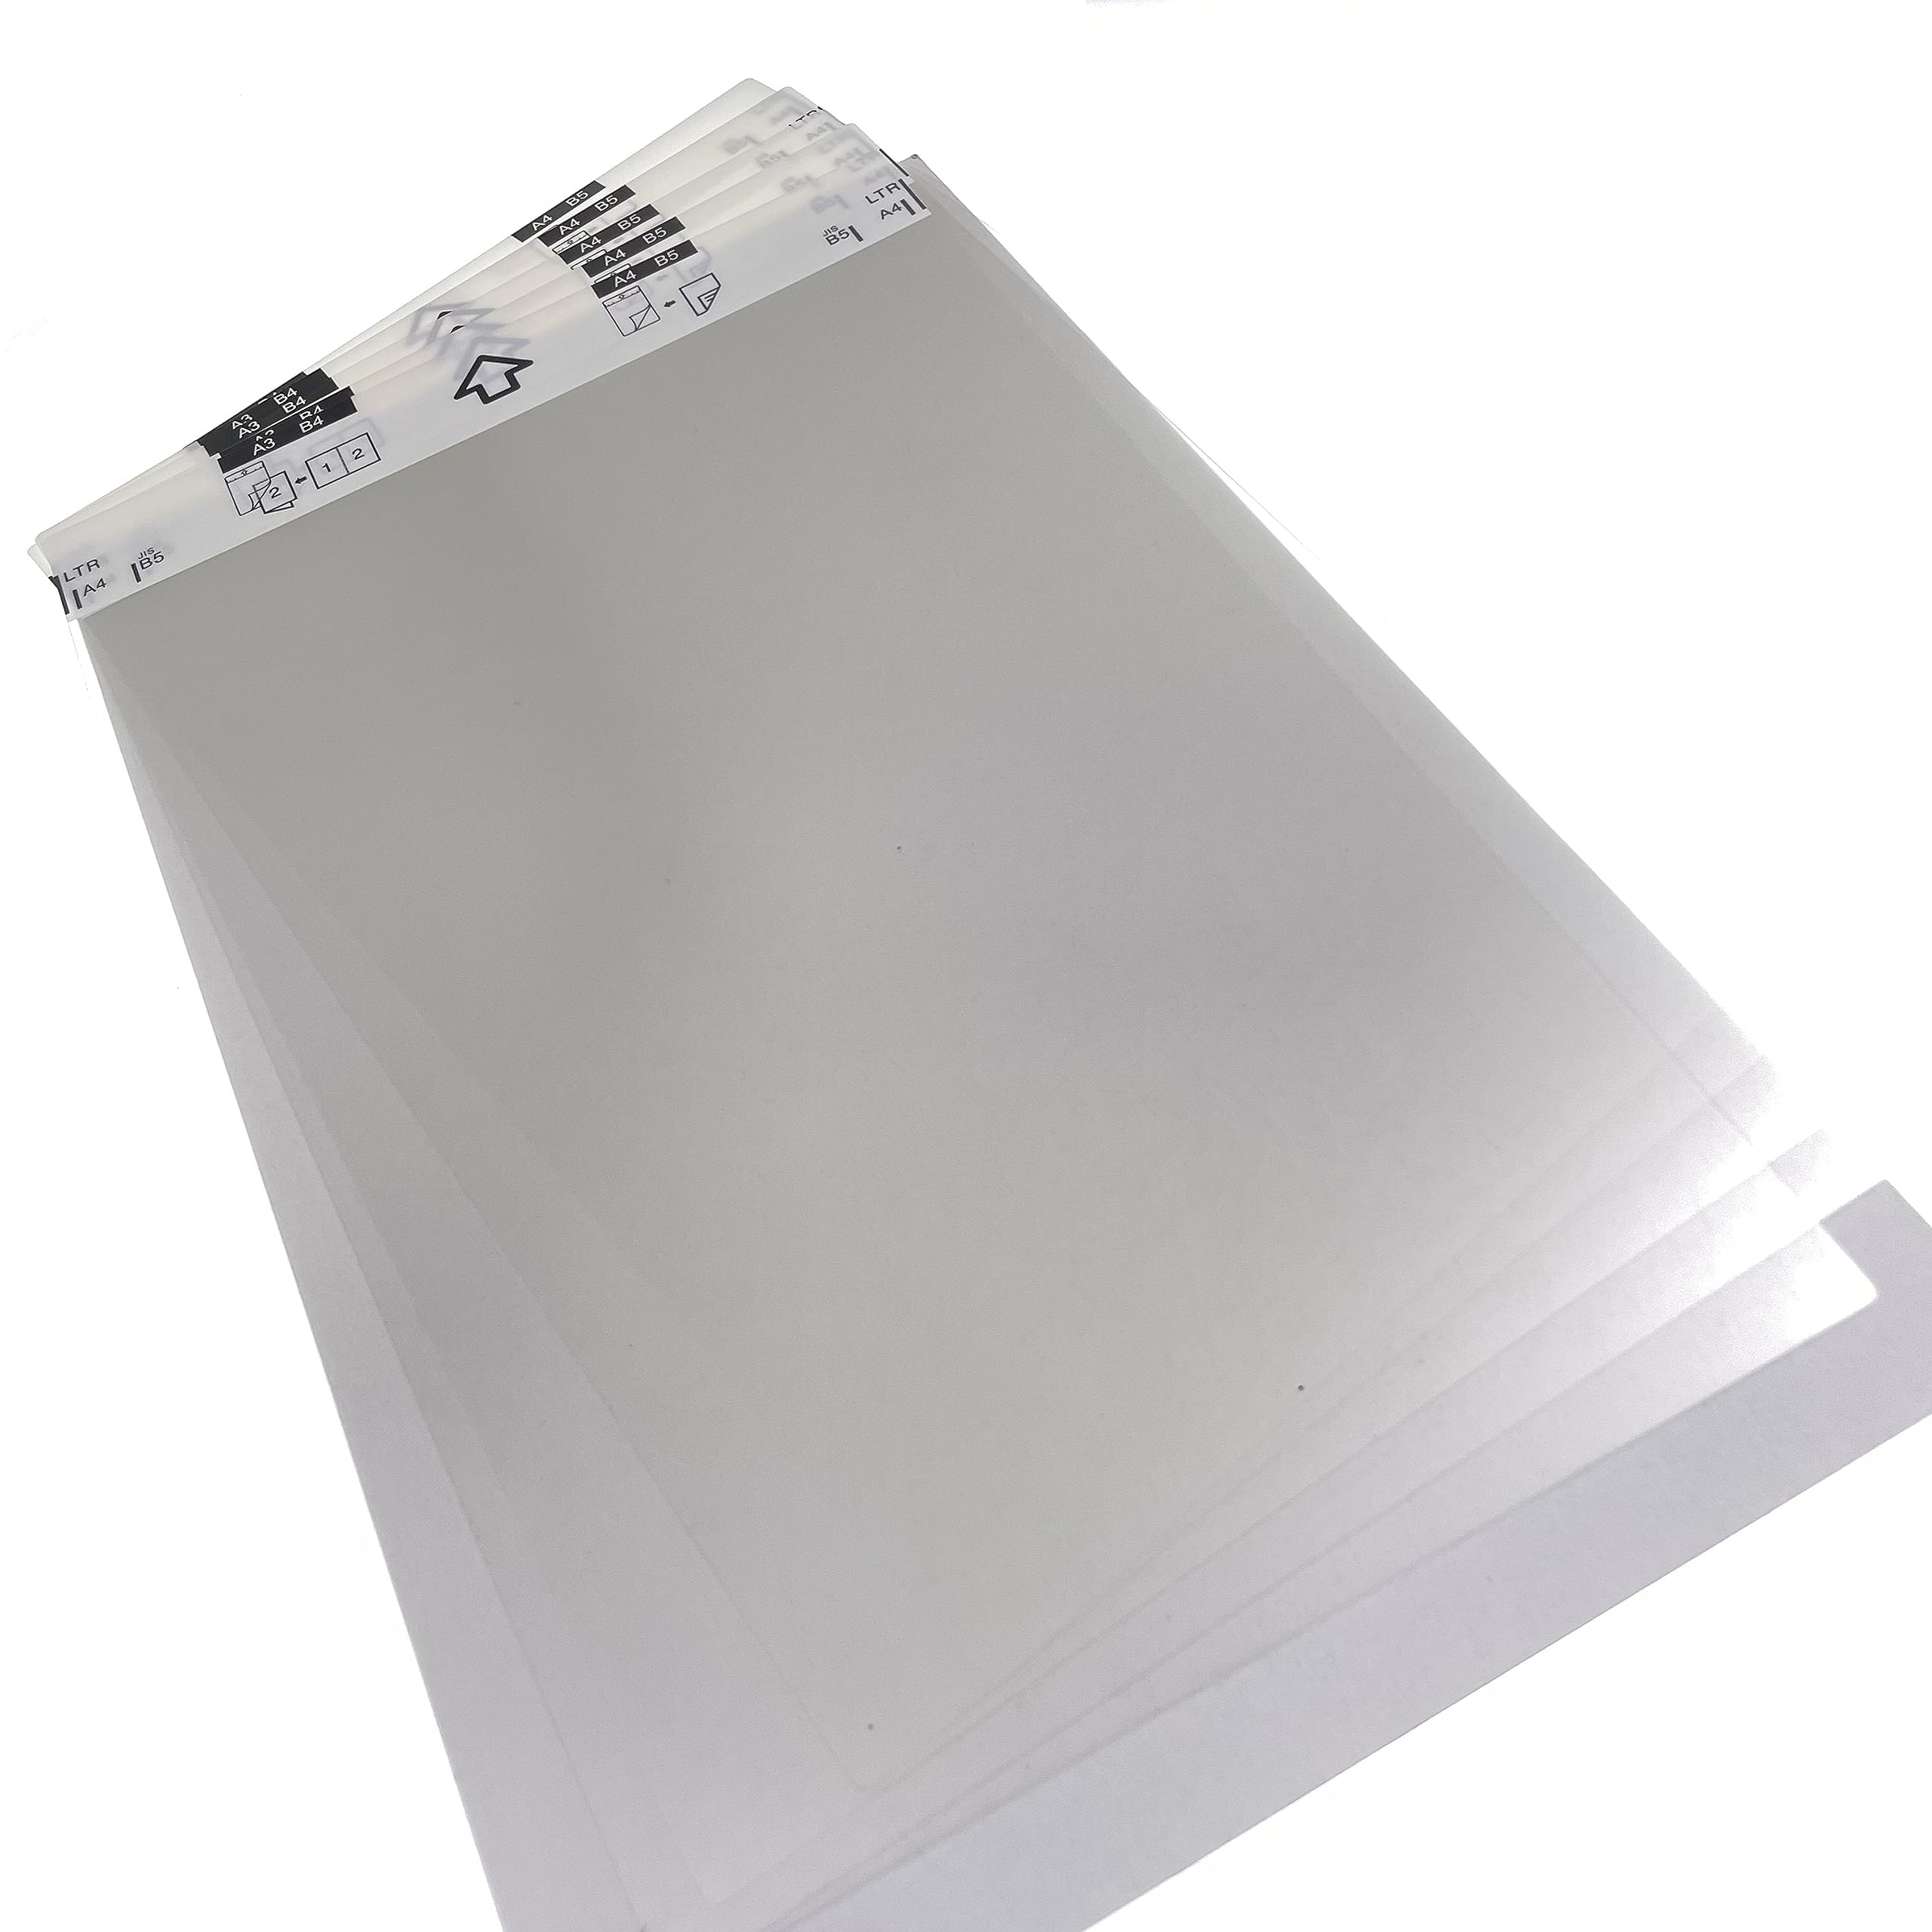 OKLILI 5pc X CS-A3001 Carrier Sheet CS-A3301 Sheets Compatible with Brother A4 Scanner Scan A3 B4 Odd-Sized Folded Torn Receipt Flimsy Wrinkled Newspaper Magazine Clipping Fragile Paper Crinkled Photo